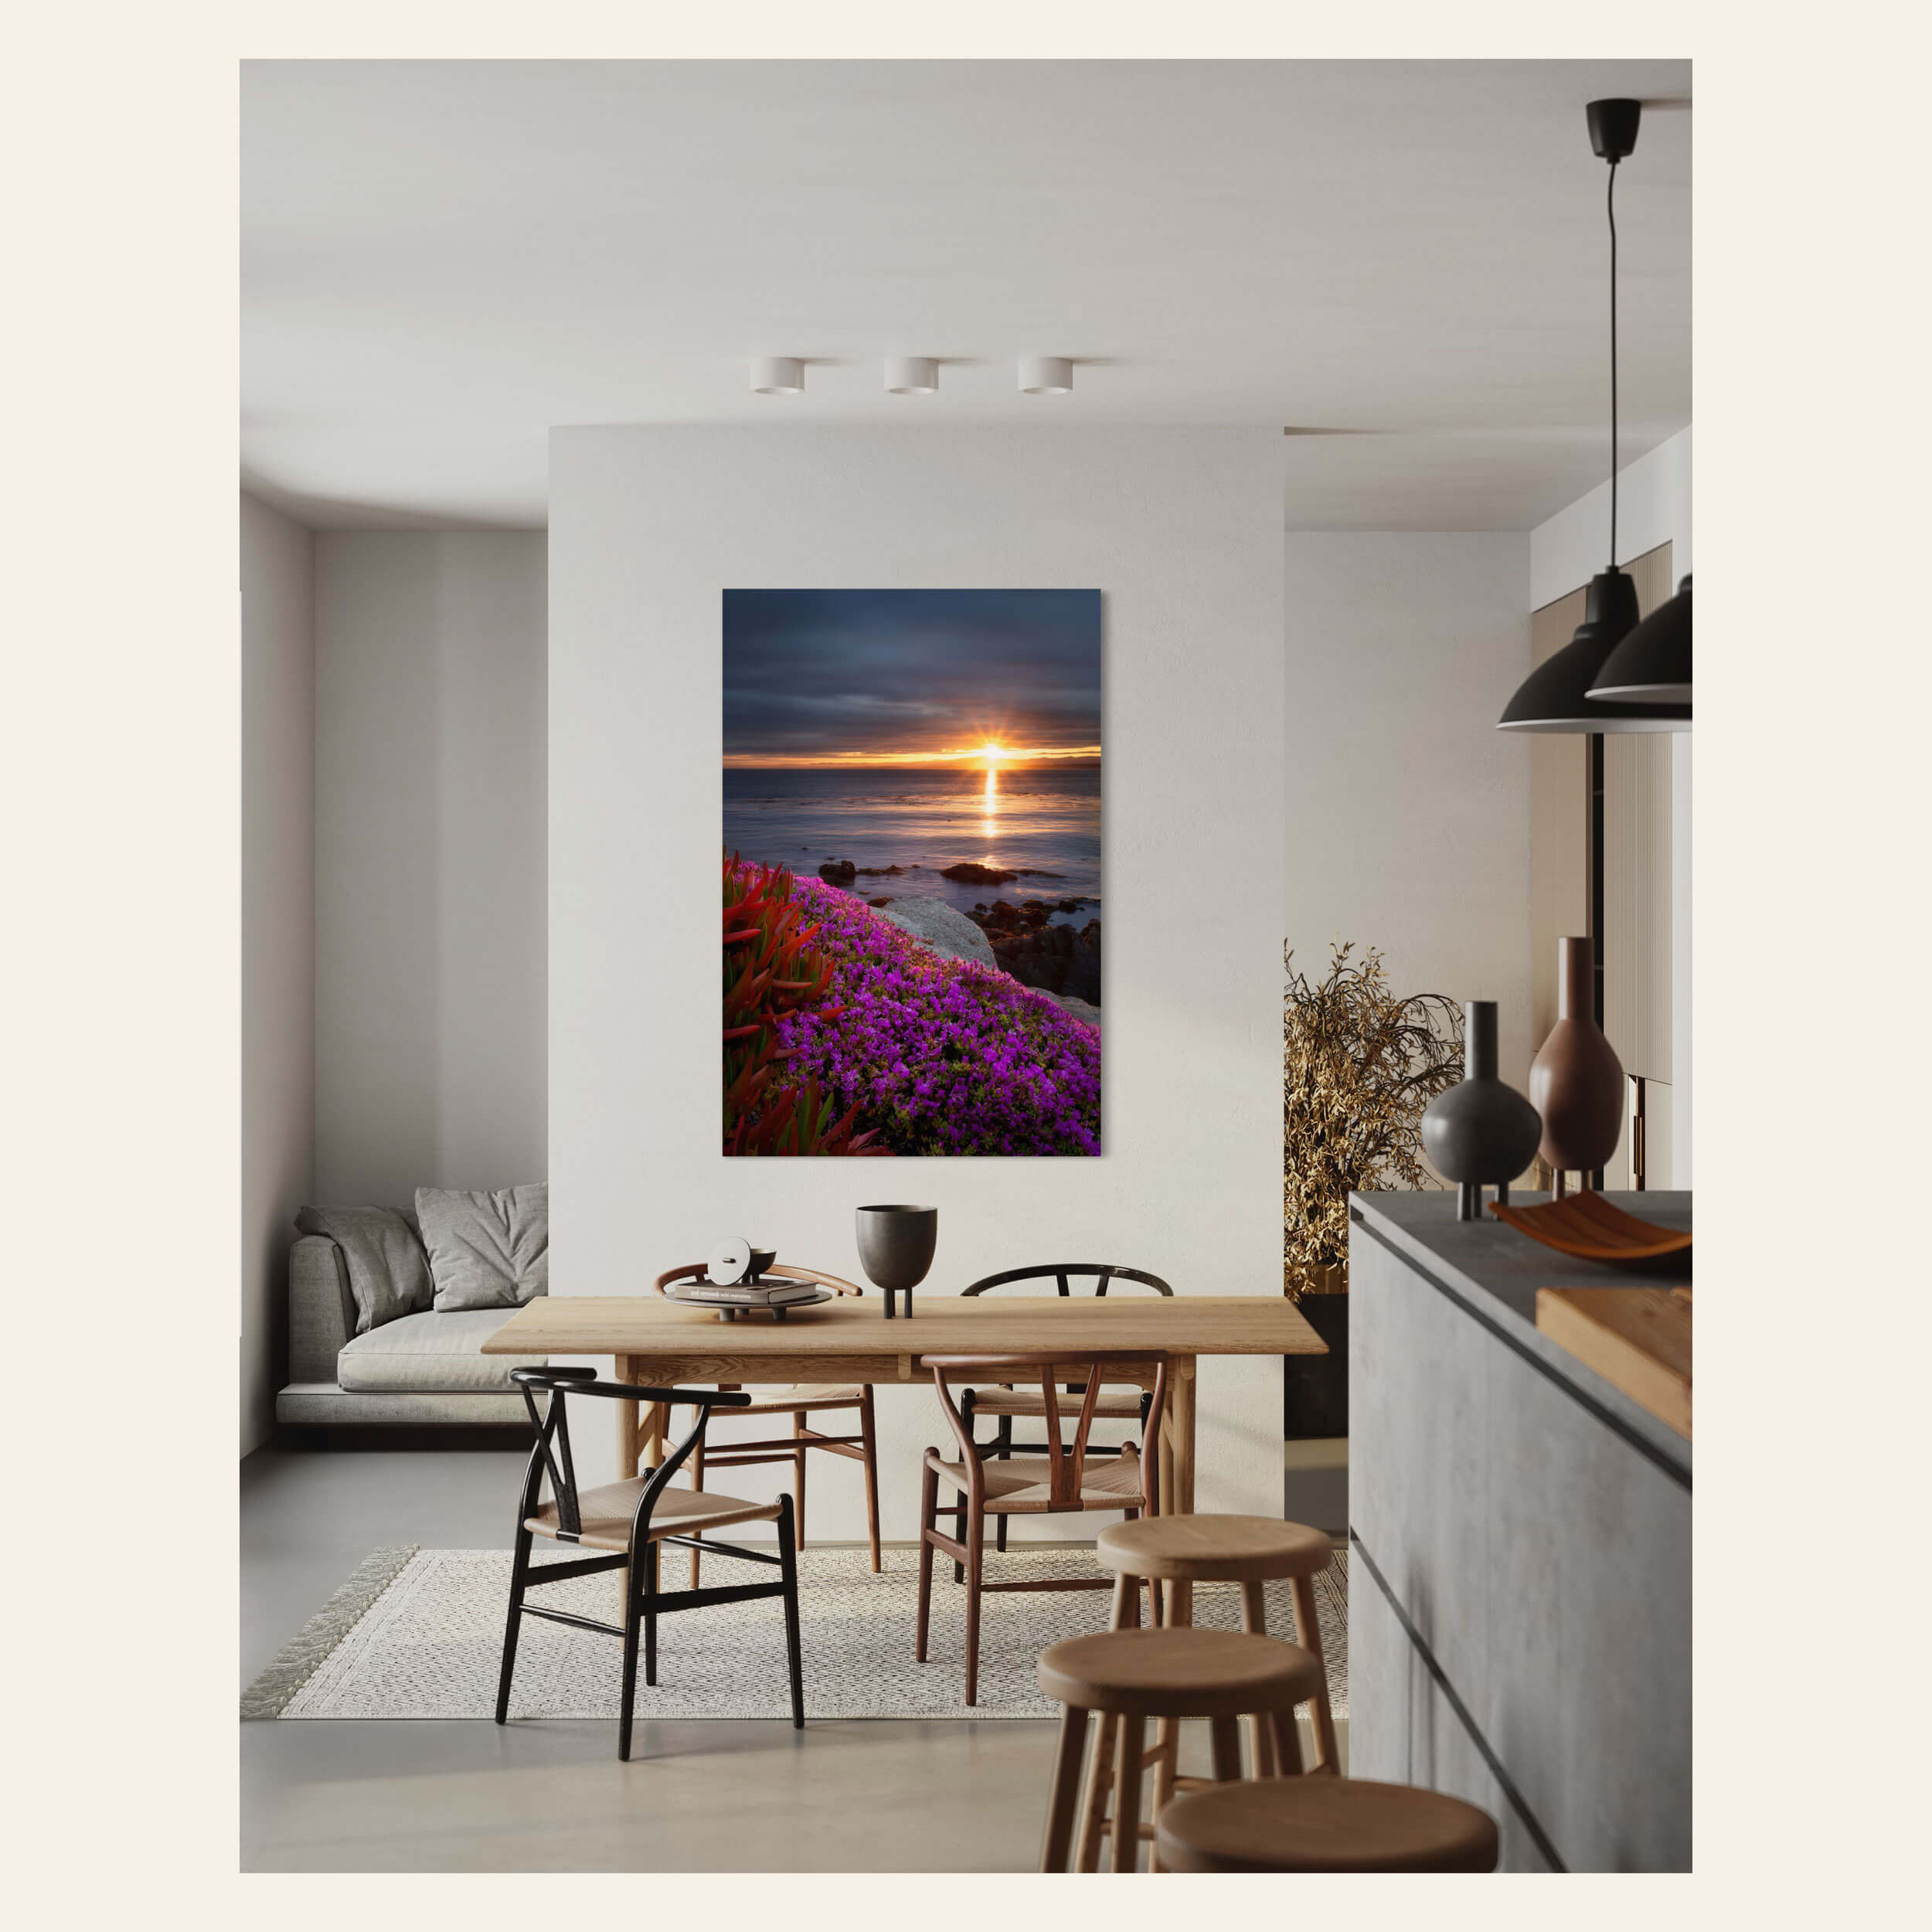 A wildflower picture of a sunrise in Pacific Grove, California, hangs in a living room.